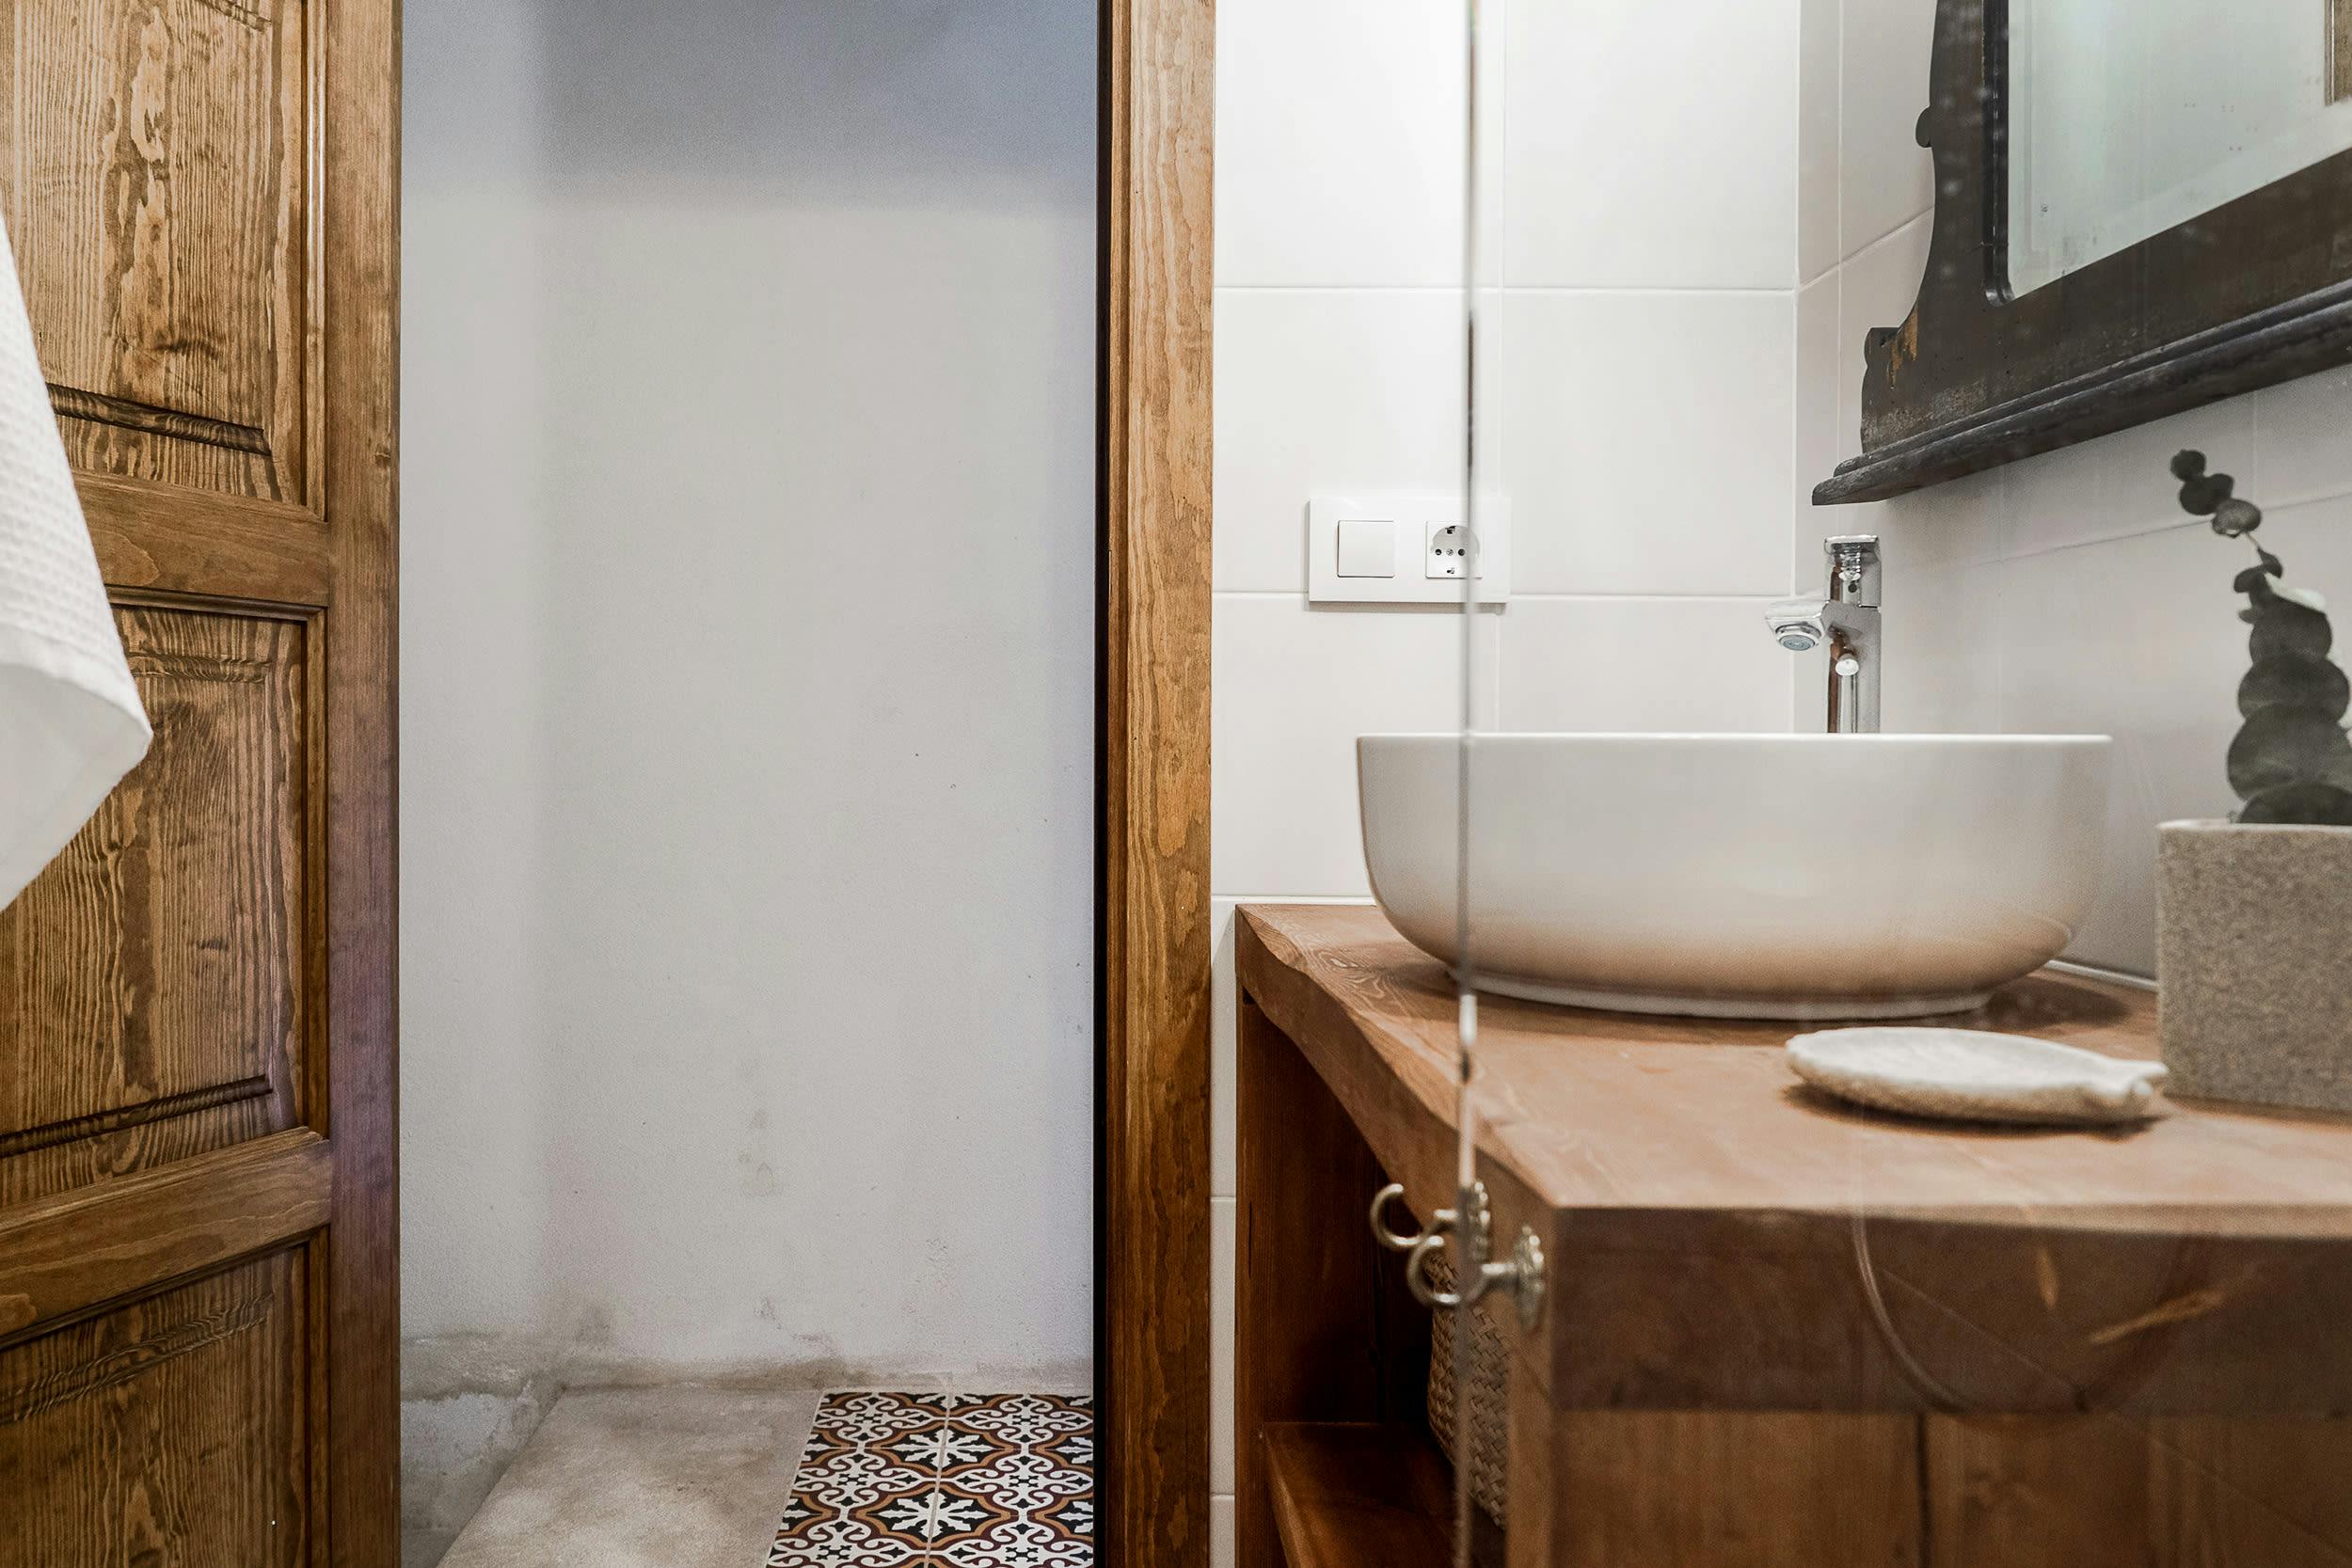 The image features a small bathroom with a white sink, a mirror, and a wooden door.